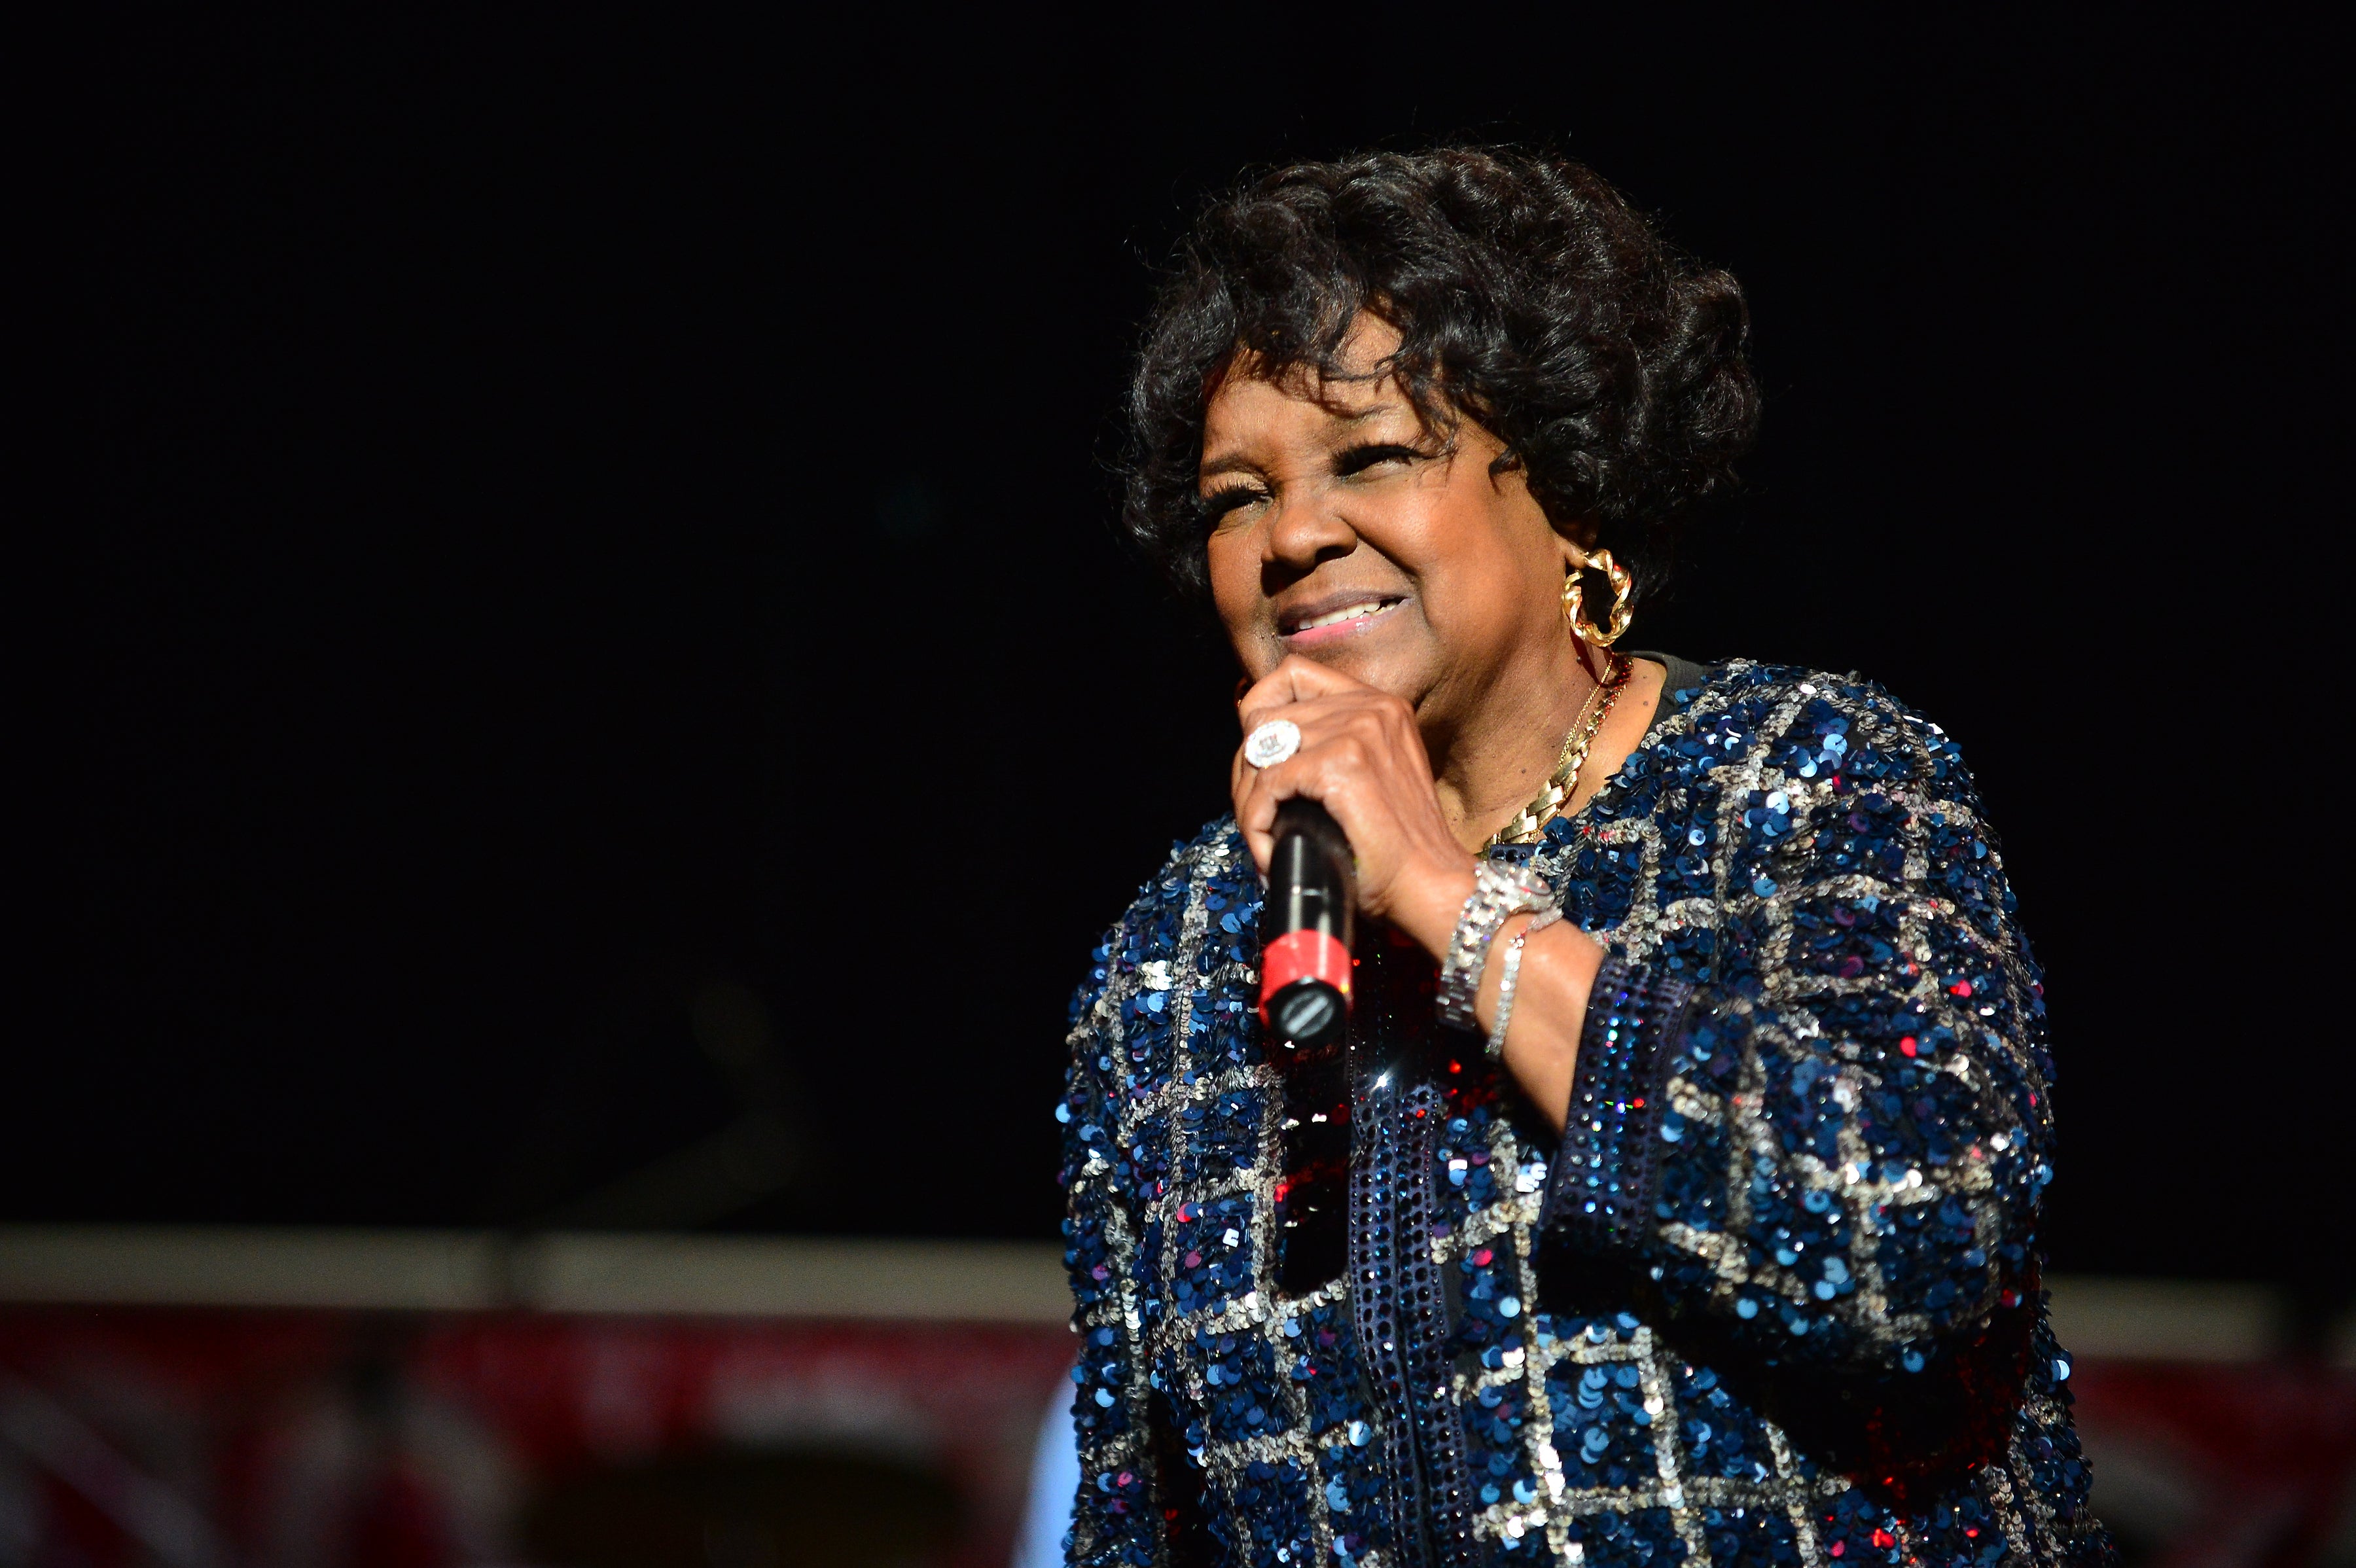 Shirley Caesar On Kim Burrell's Homophobic Comments: 'Should've Said Something 4 Years Ago When Our President Made It Alright'
